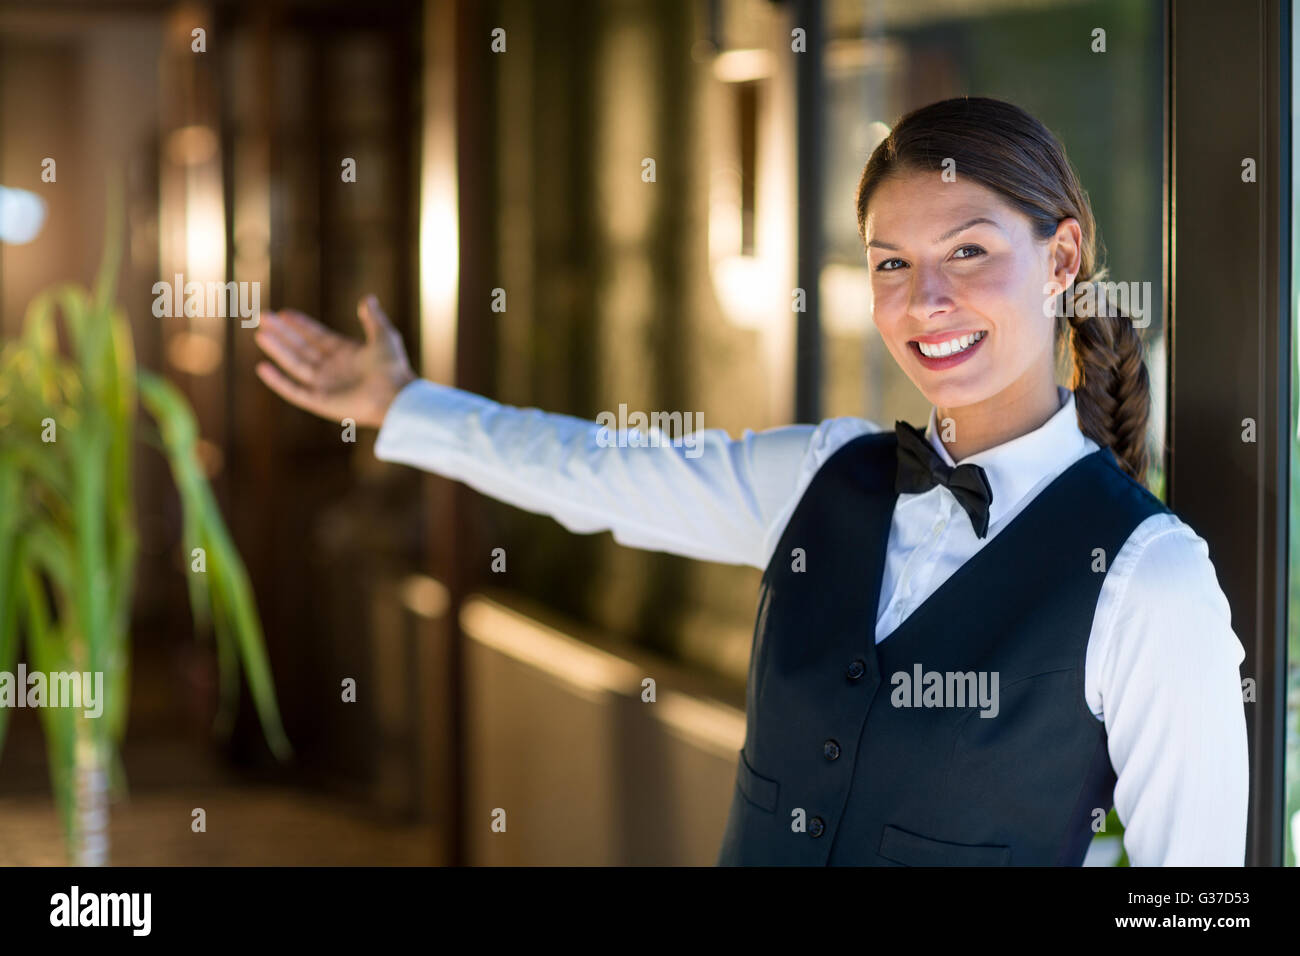 Portrait of smiling waitress welcoming Stock Photo